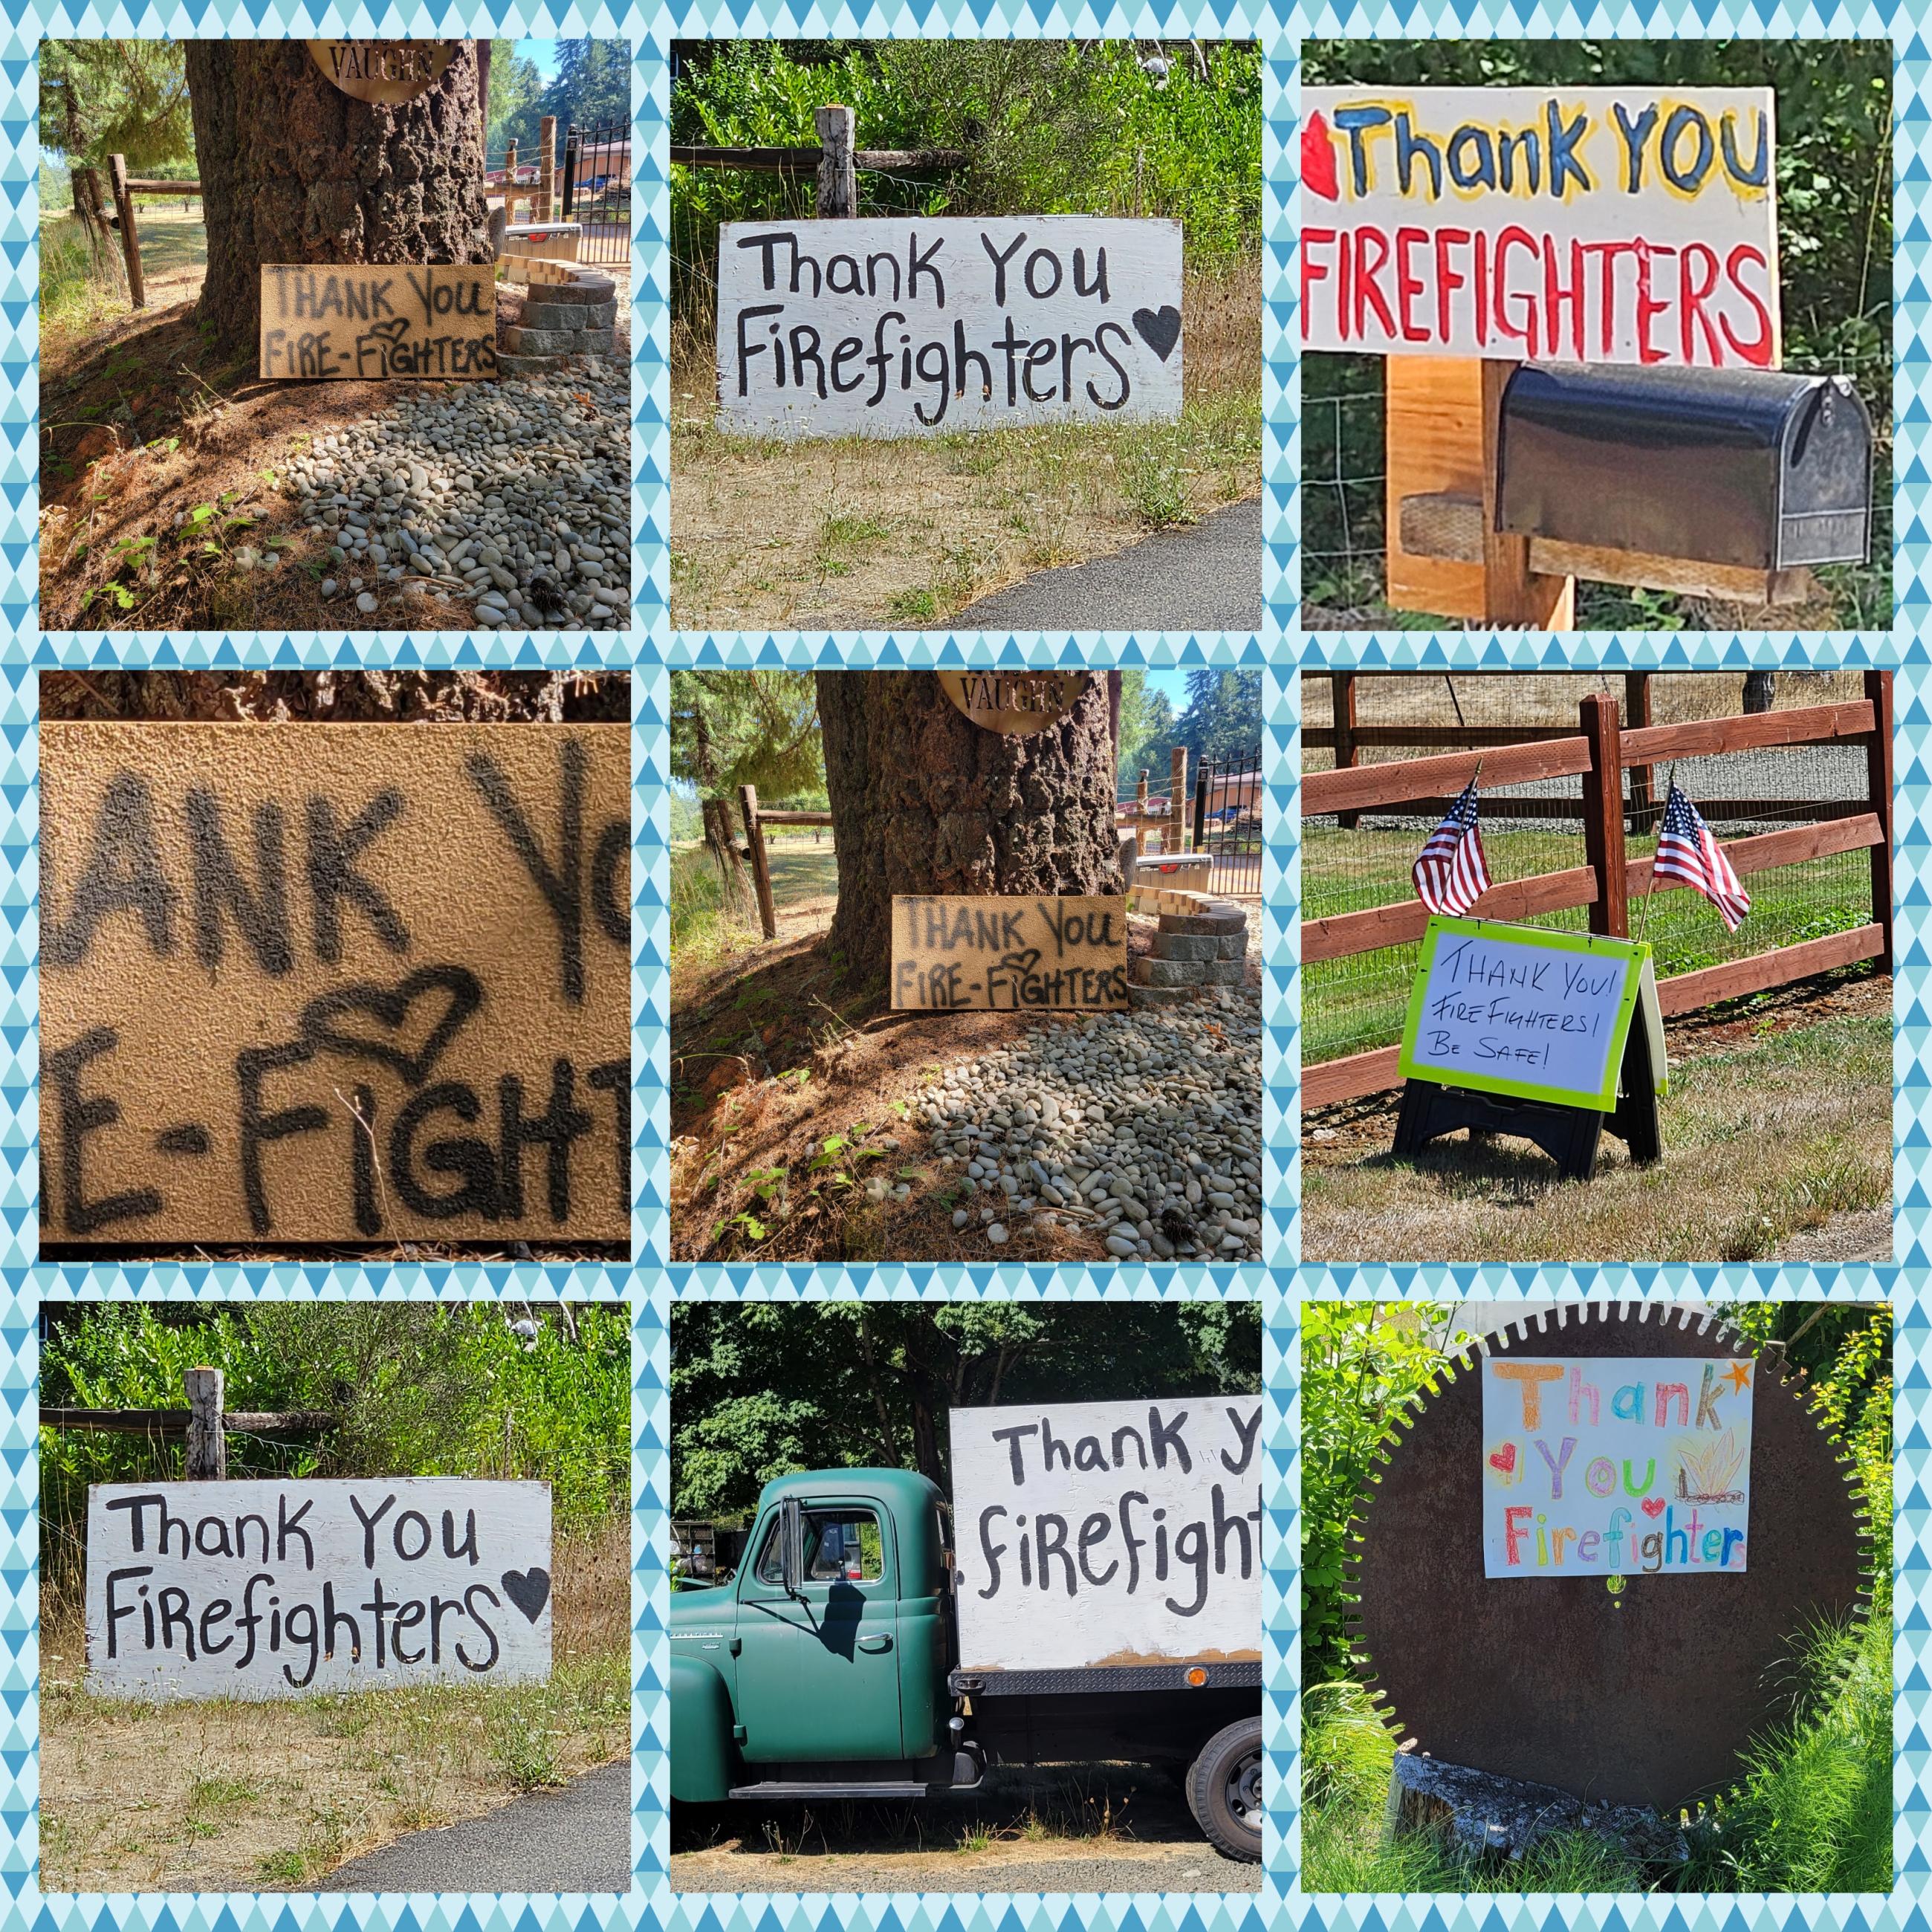 Nine different "Thank You Firefighter" signs on a collage